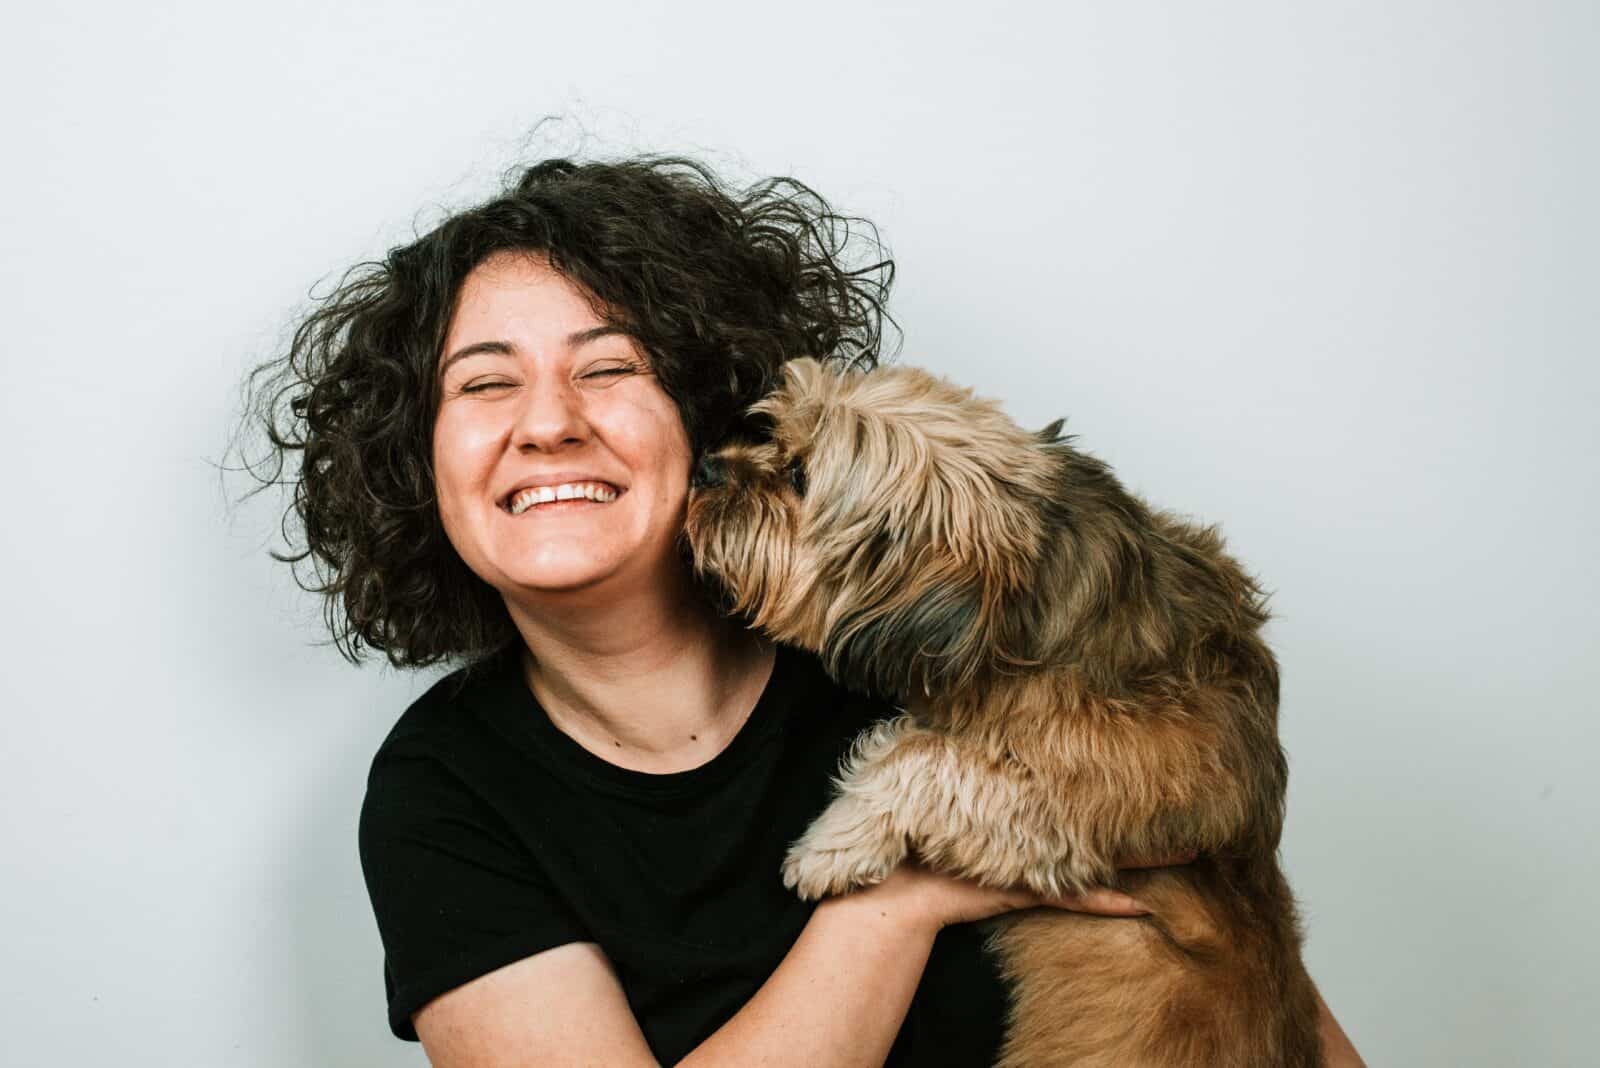 A woman and her dog show affection.